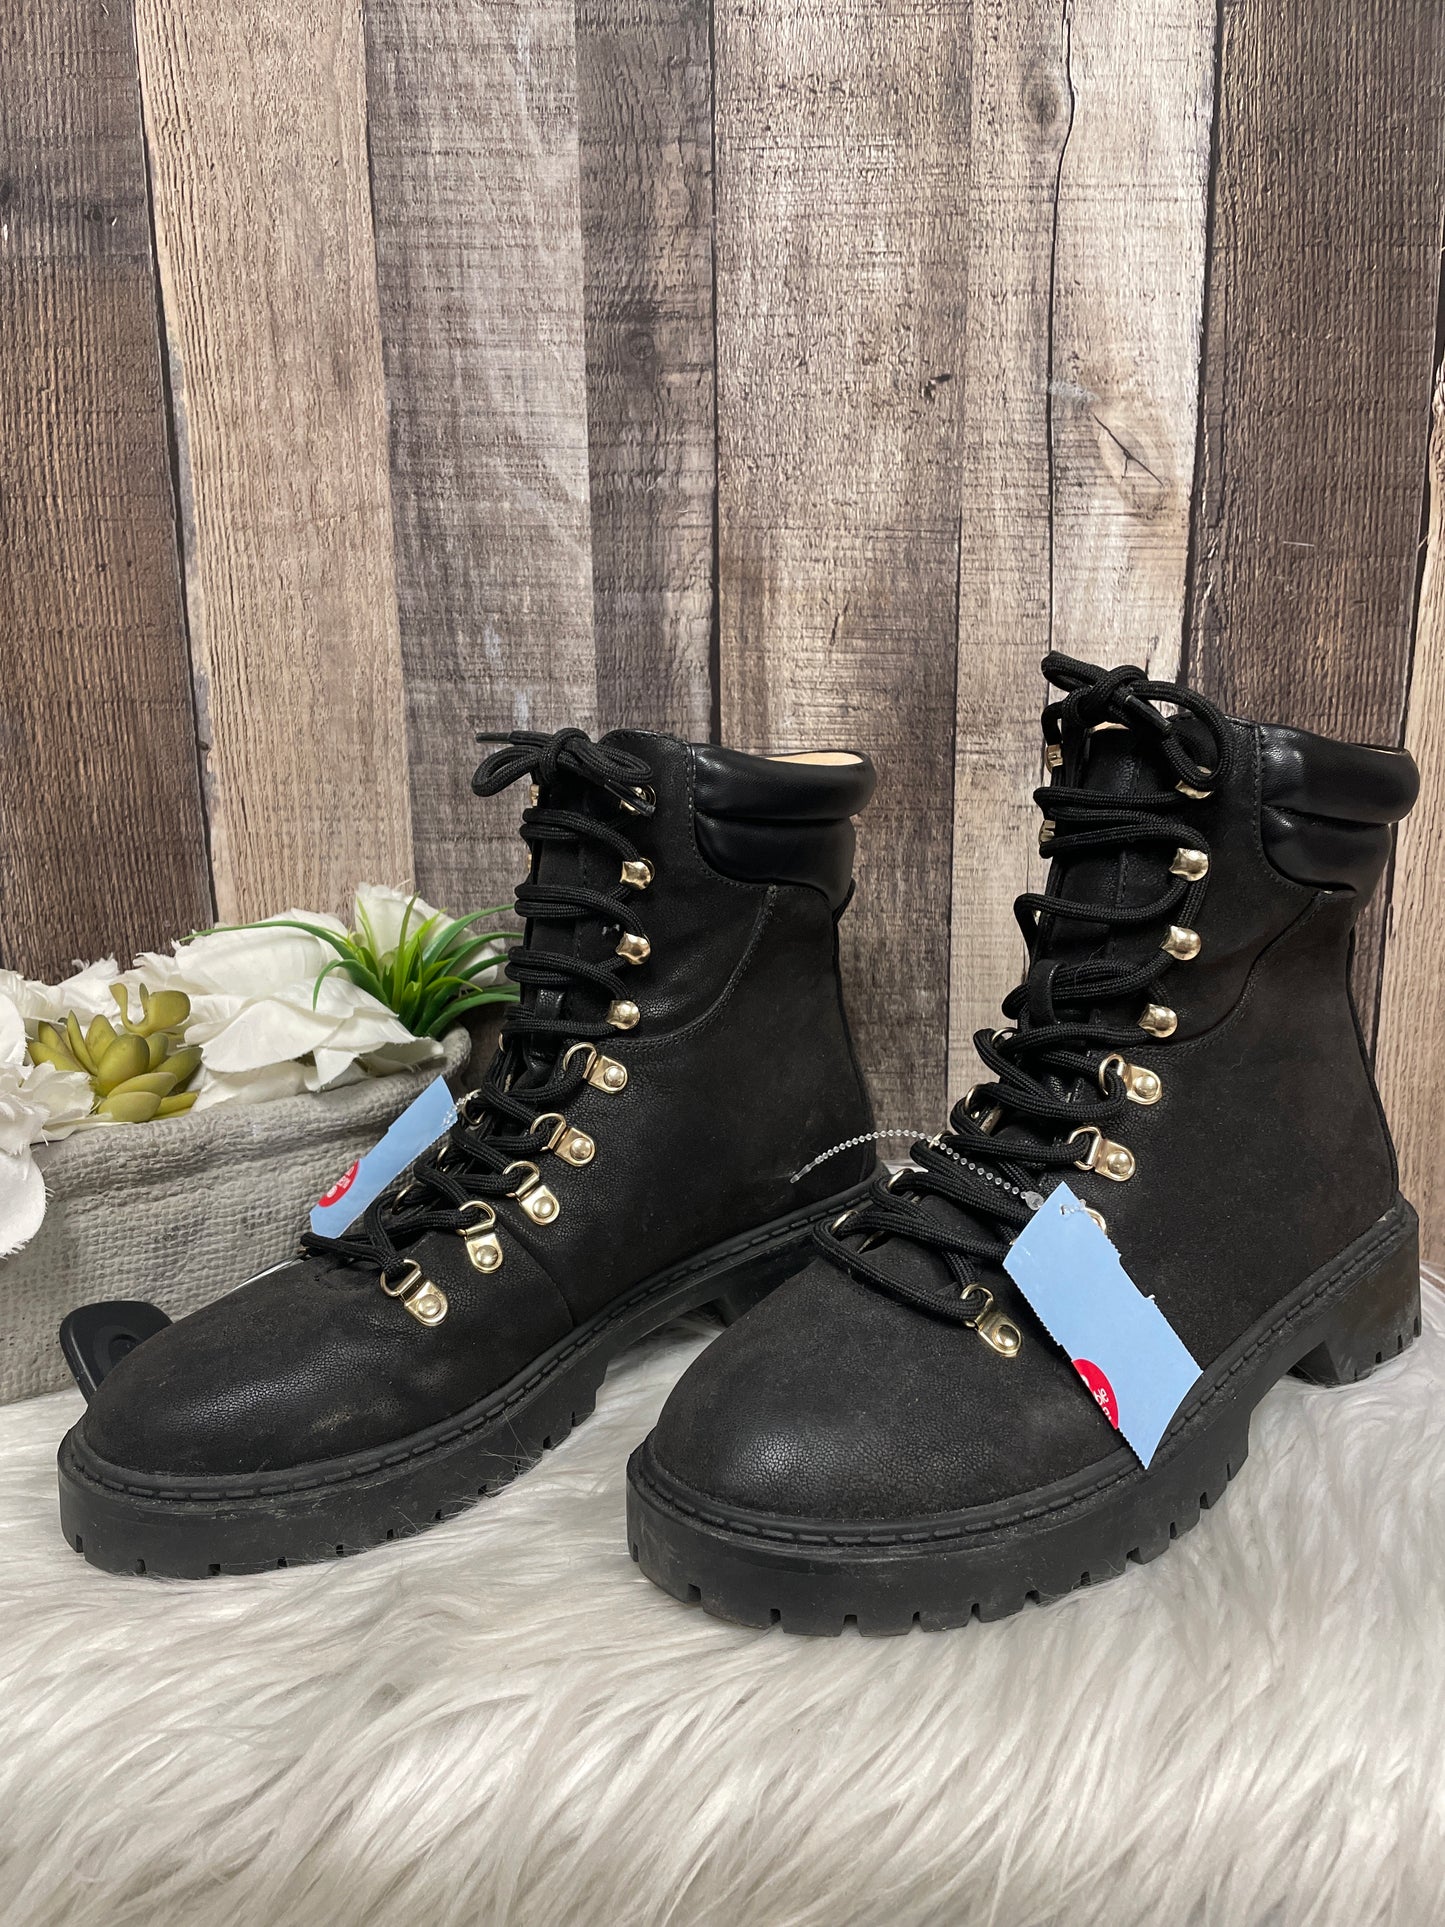 Boots Hiking By Loft  Size: 7.5